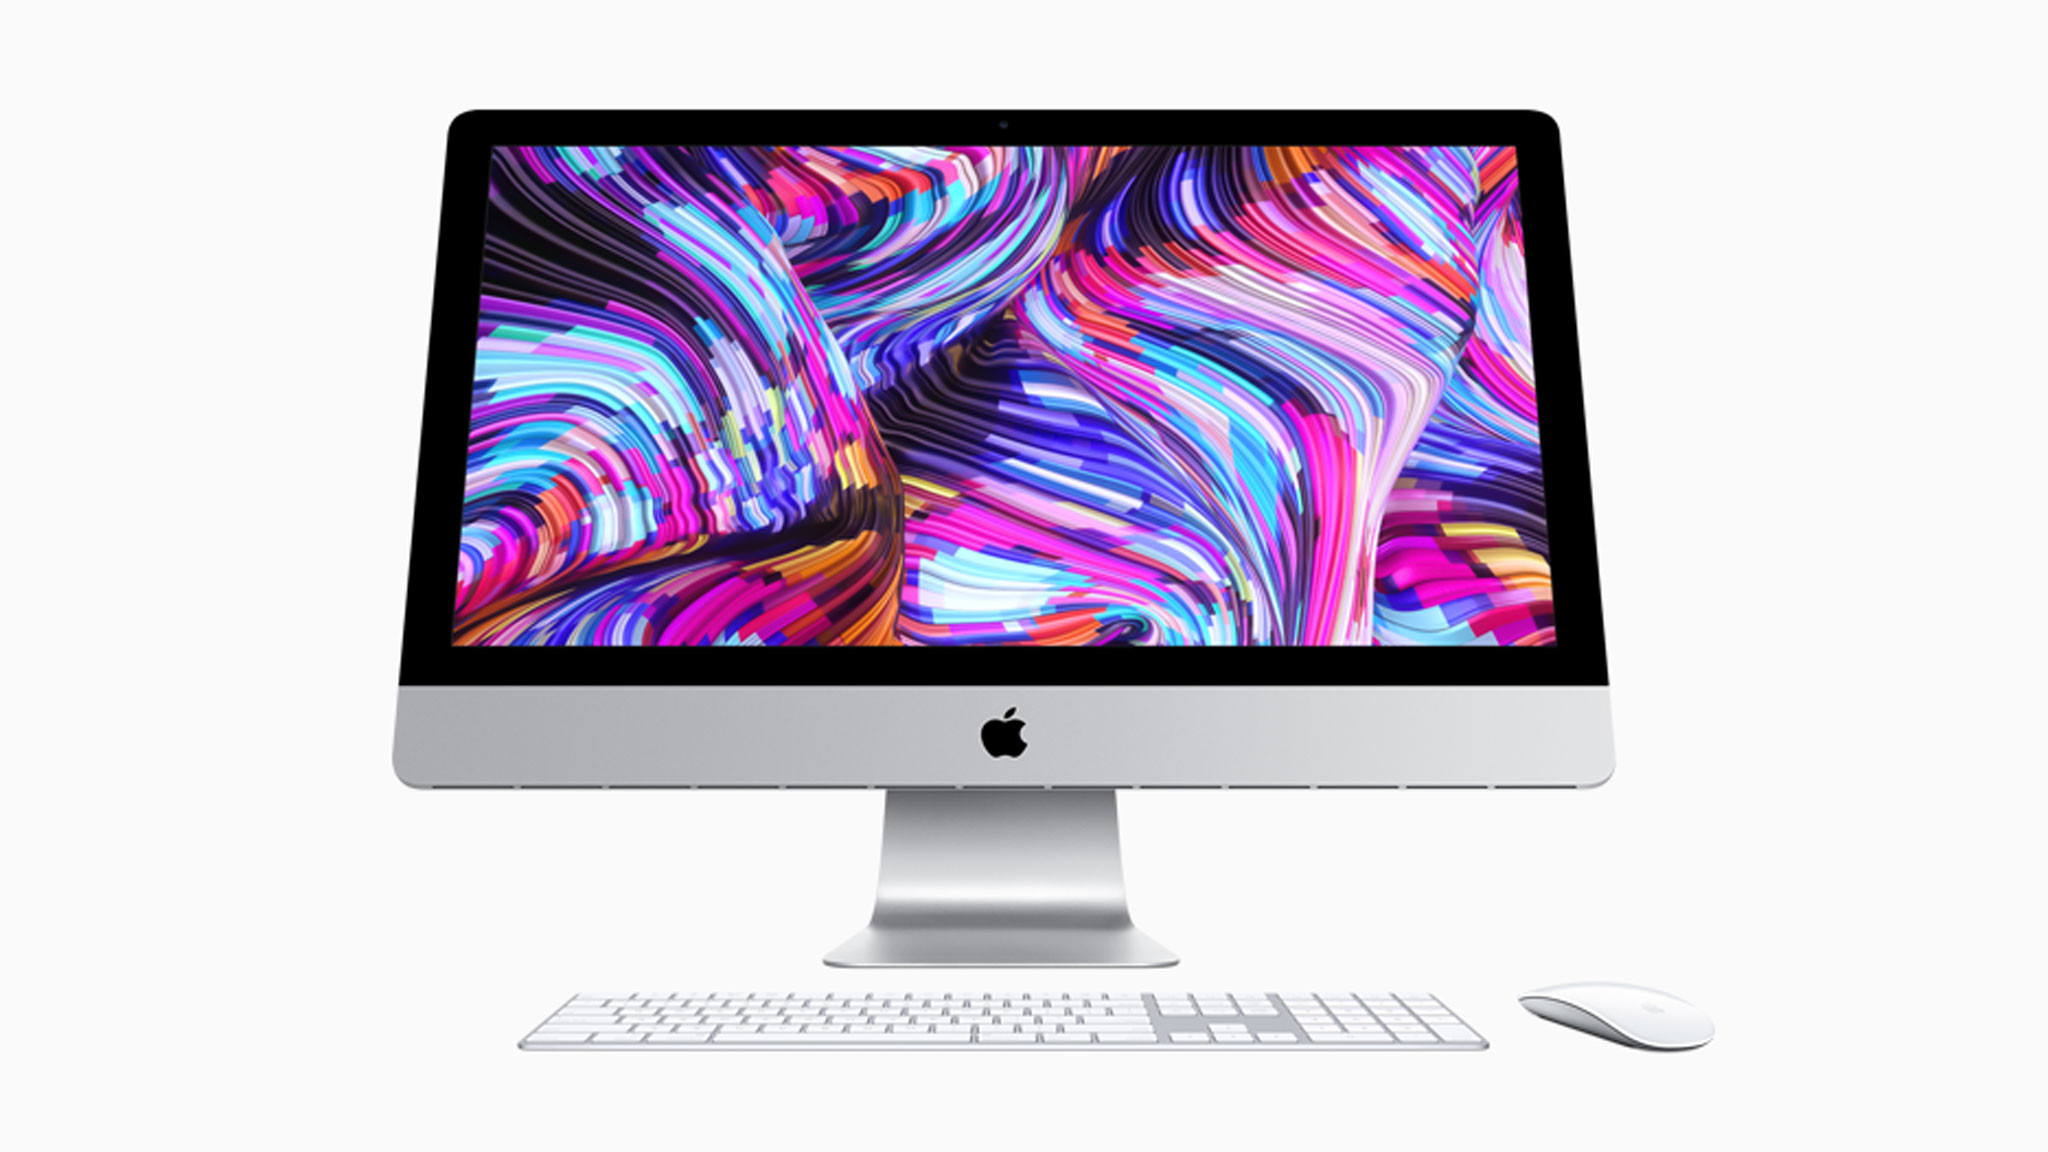 Coming soon with the M1 processor?  Those two iMacs no longer exist